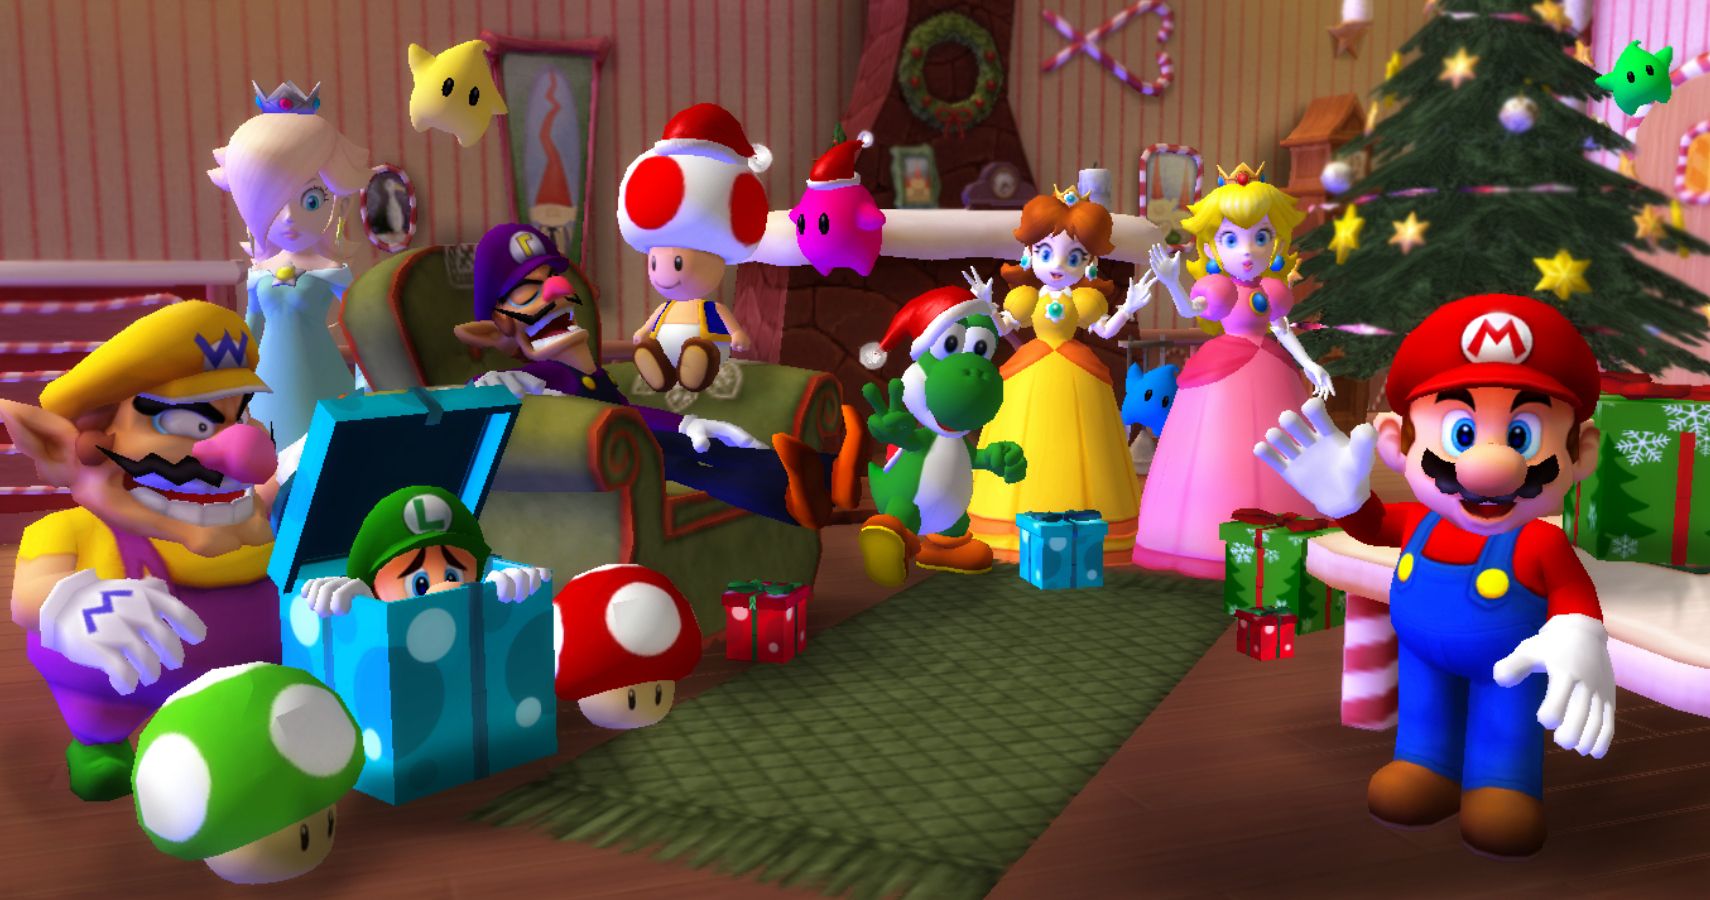 Research Predicts People Will Be Playing A Whole Lot More Mario Kart This Christmas